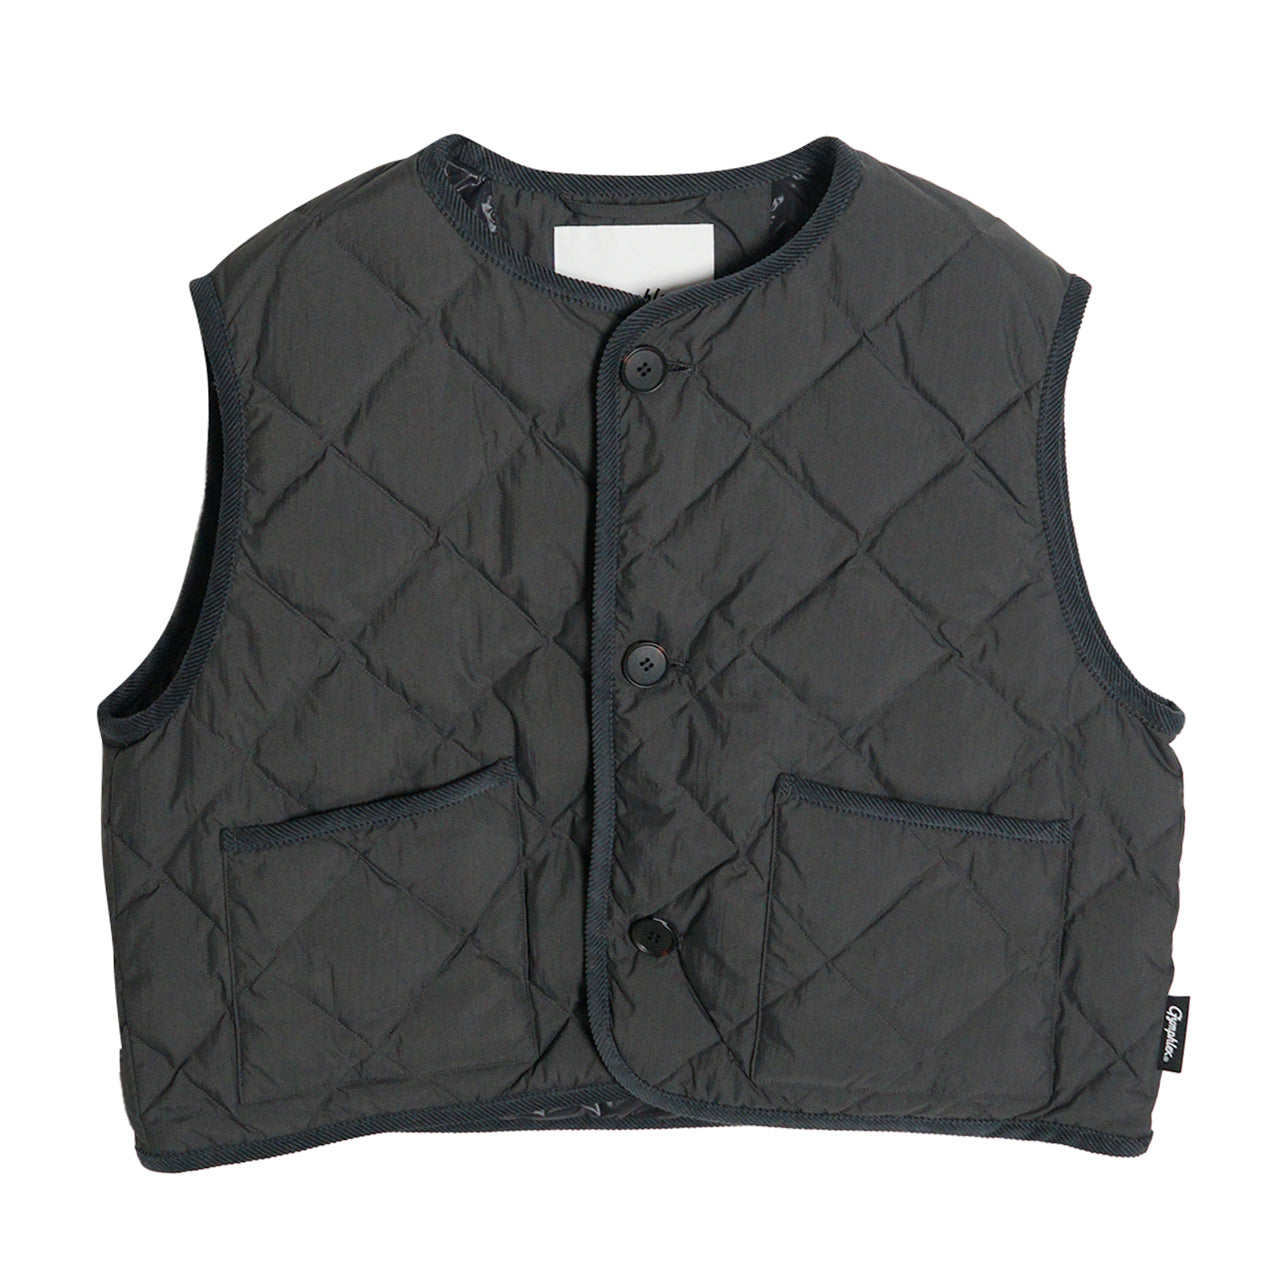 Gymphlex ジムフレックス キルト ダウン ショート ベスト QUILT DOWN SHORT VEST GY-A0433NYM